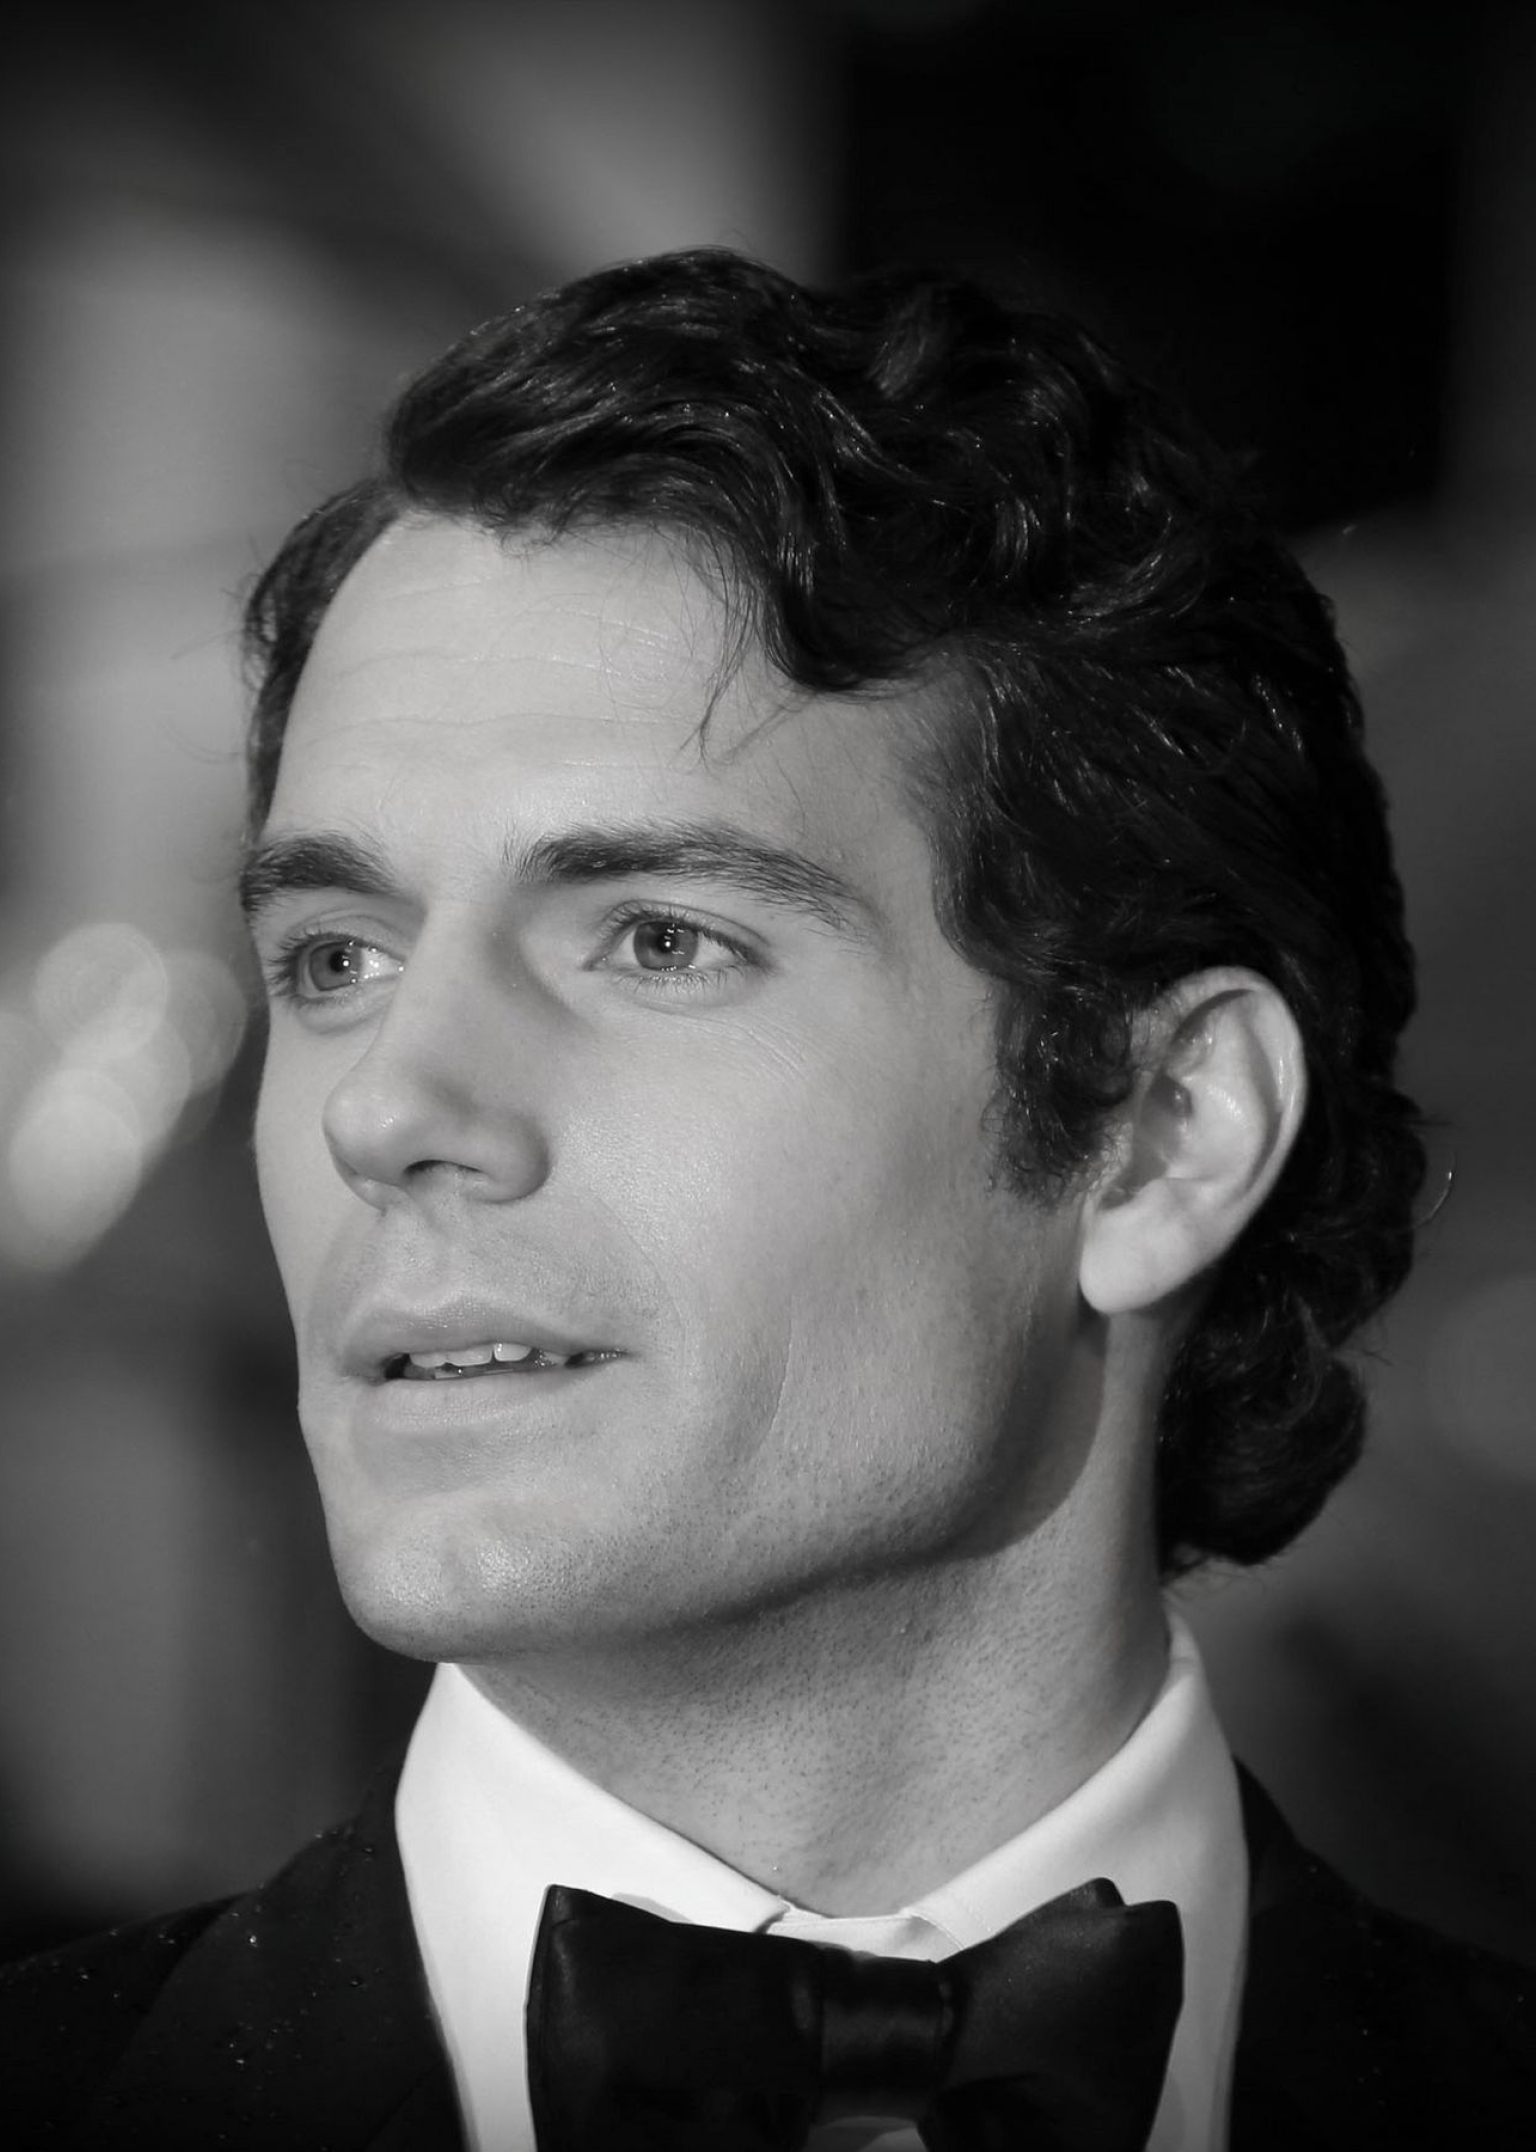 1536x2152 Resolution Henry Cavill Black Suit Images 1536x2152 ...